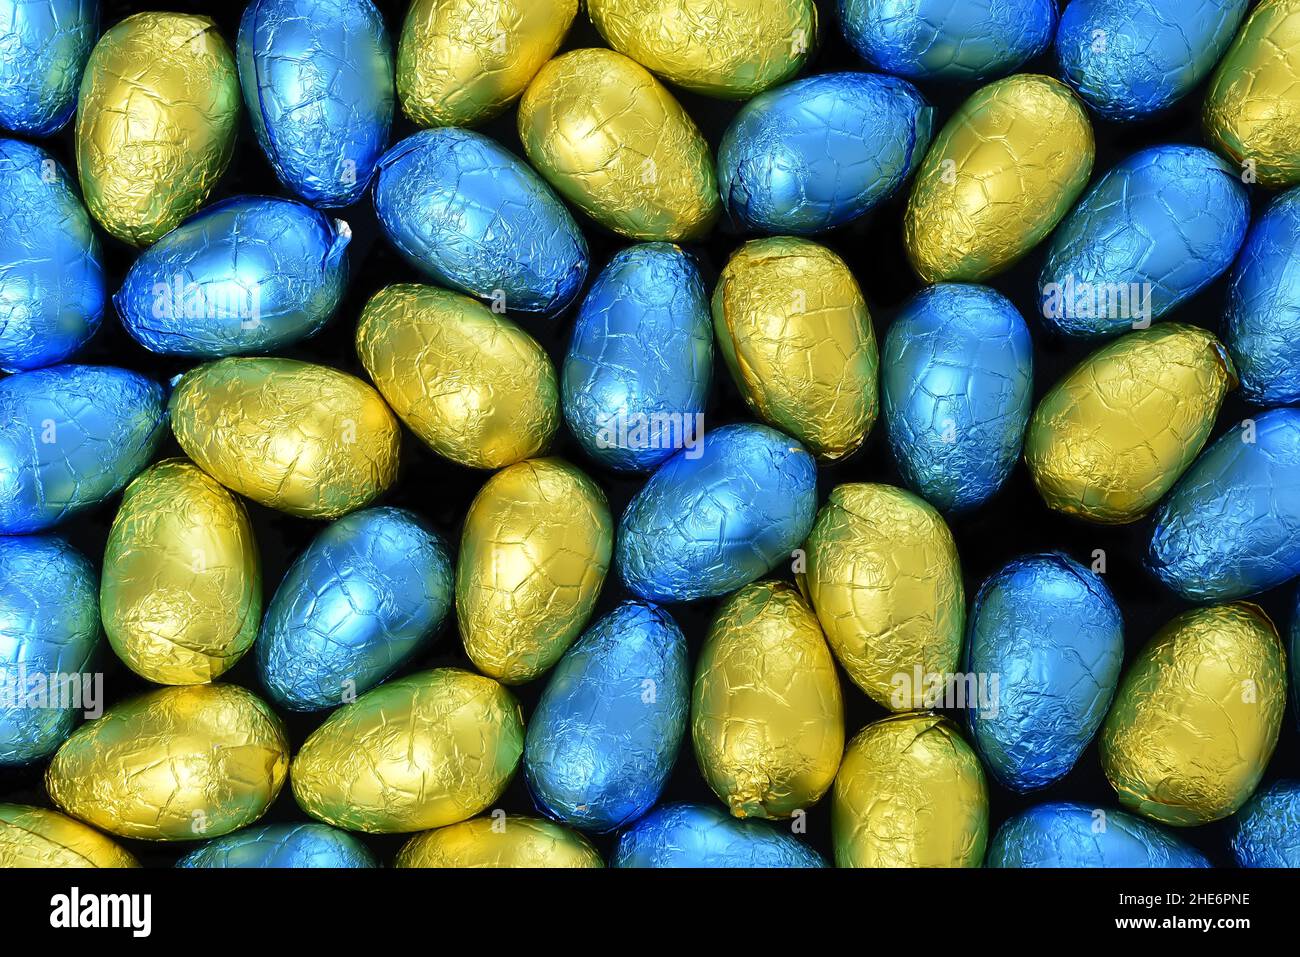 Pile or group of multi colored and different sizes of colourful foil wrapped chocolate easter eggs in blue, yellow and lime green. Stock Photo